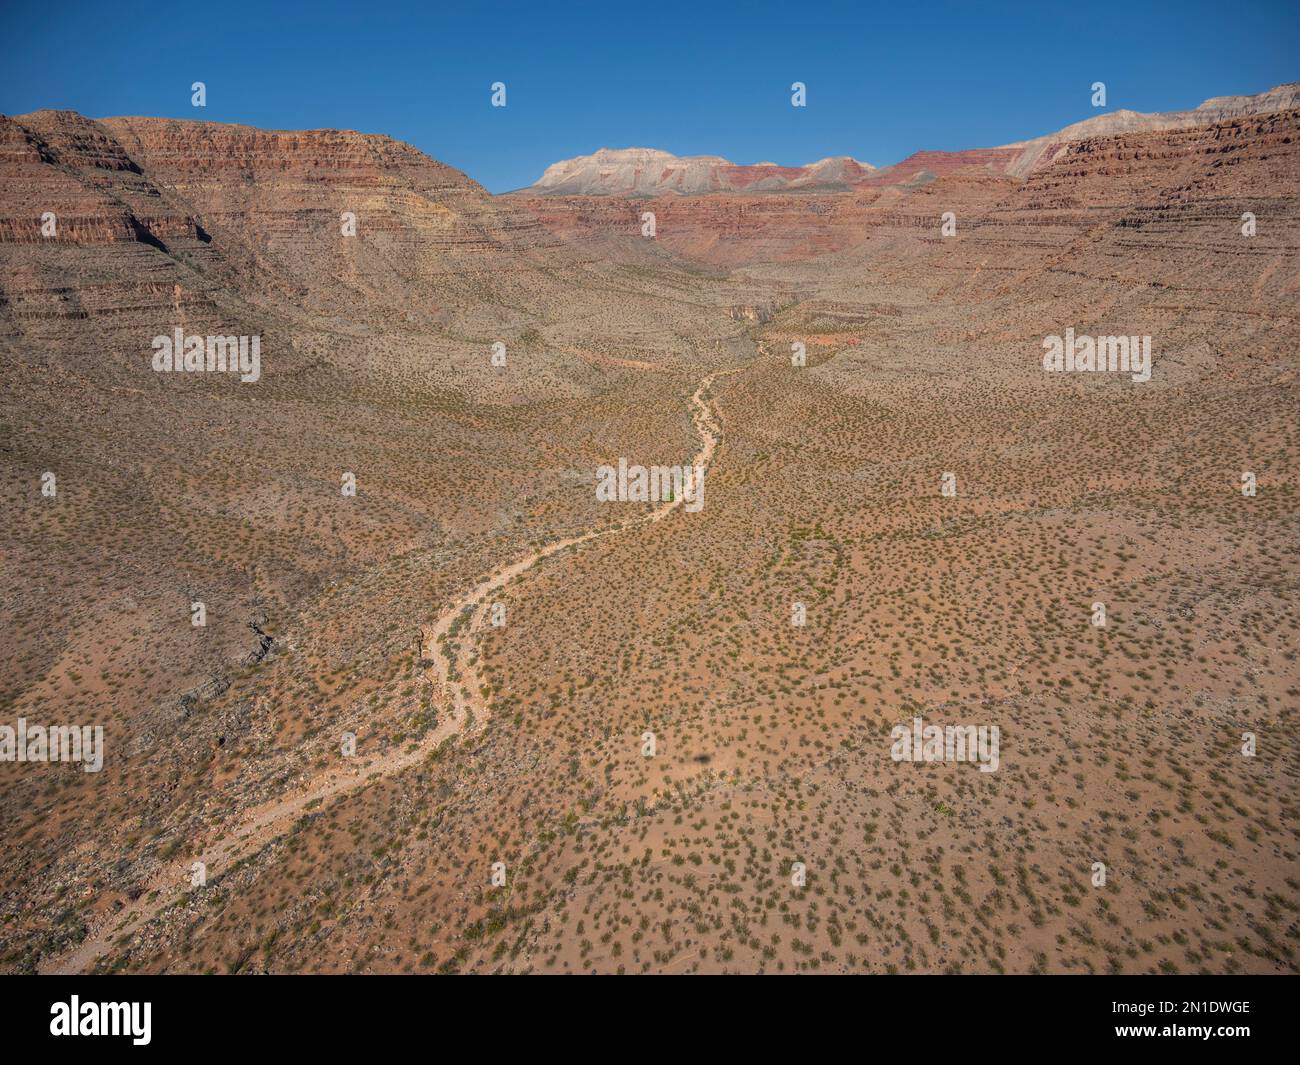 View from a flight out to the Bar 10 Ranch, North Rim of Grand Canyon National Park, Arizona, United States of America, North America Stock Photo